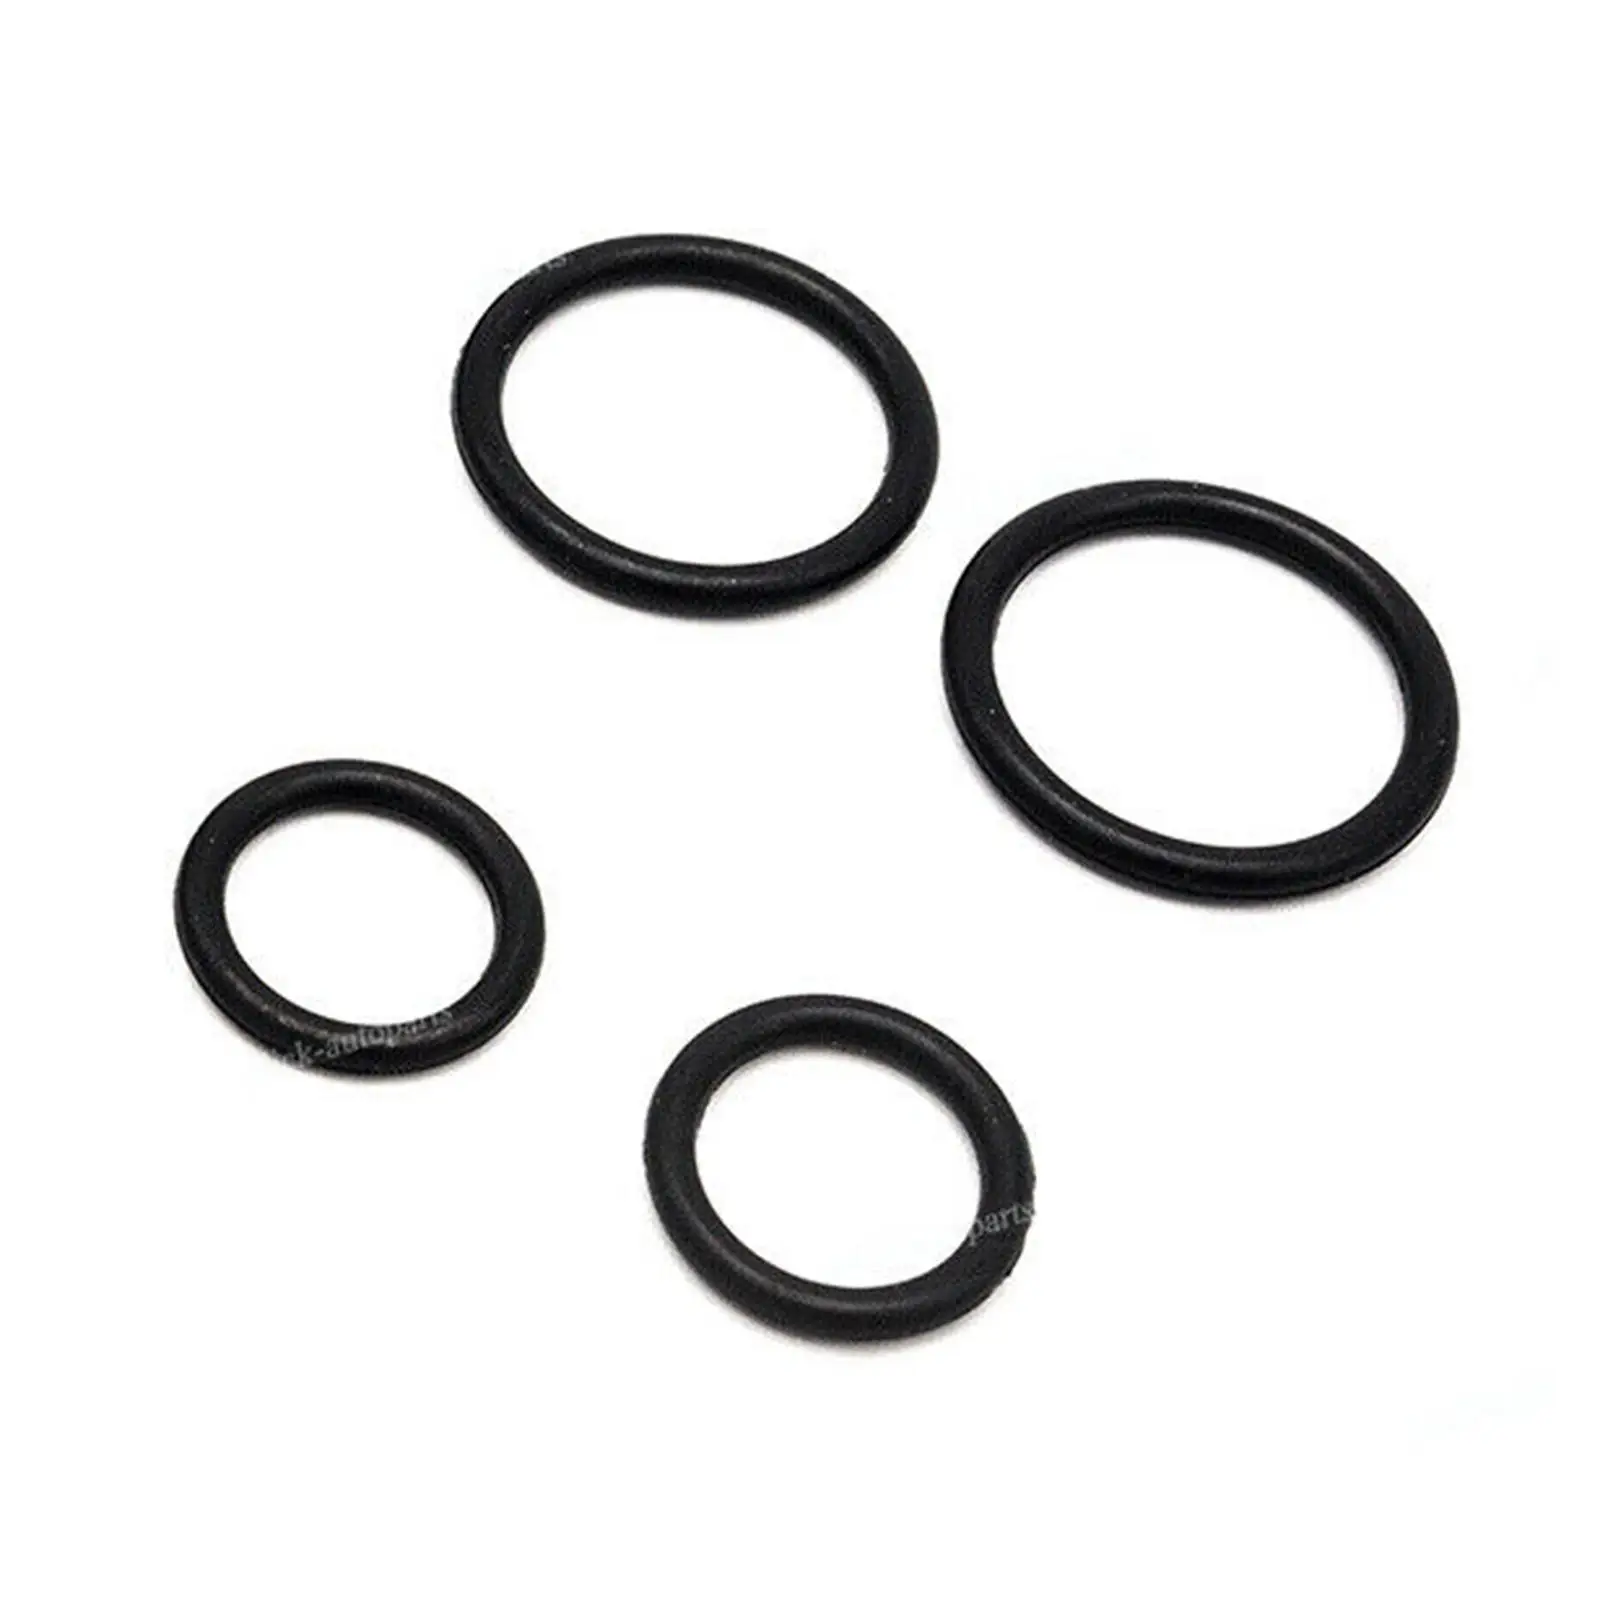 Car Engine Oil Cooler Gasket Seals 55354071 Fit for Chevy Aveo Aveo5 Cruze/Limited